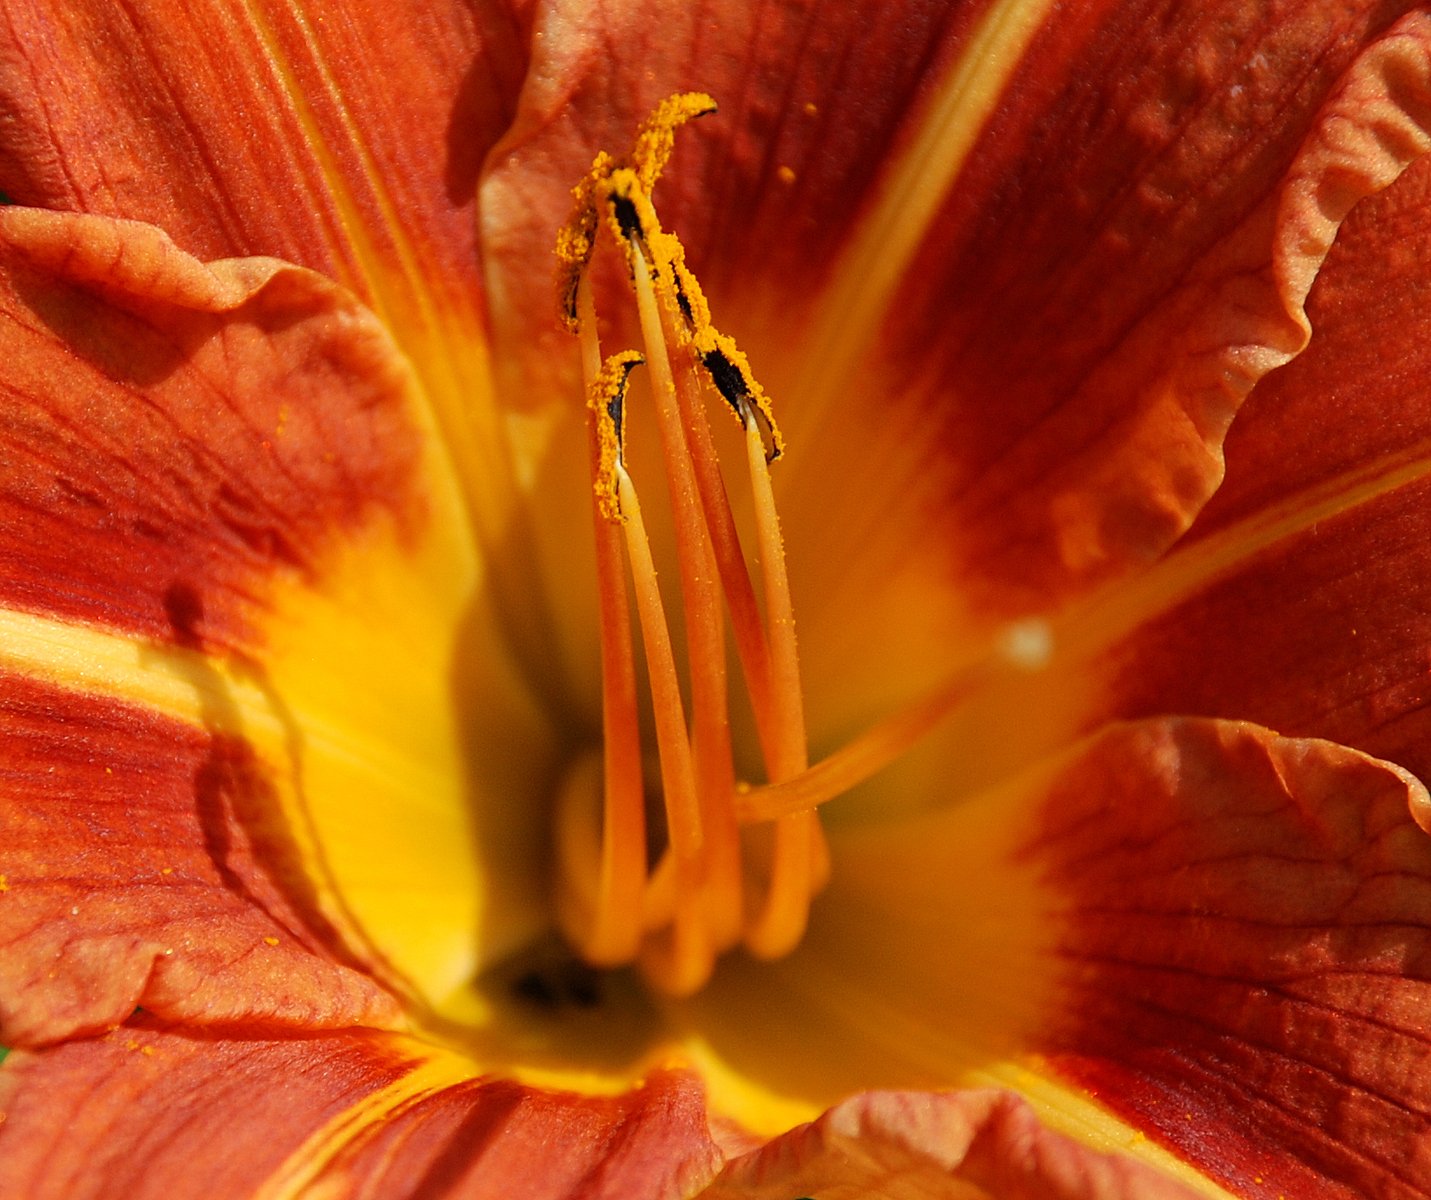 the inside of a orange and yellow flower